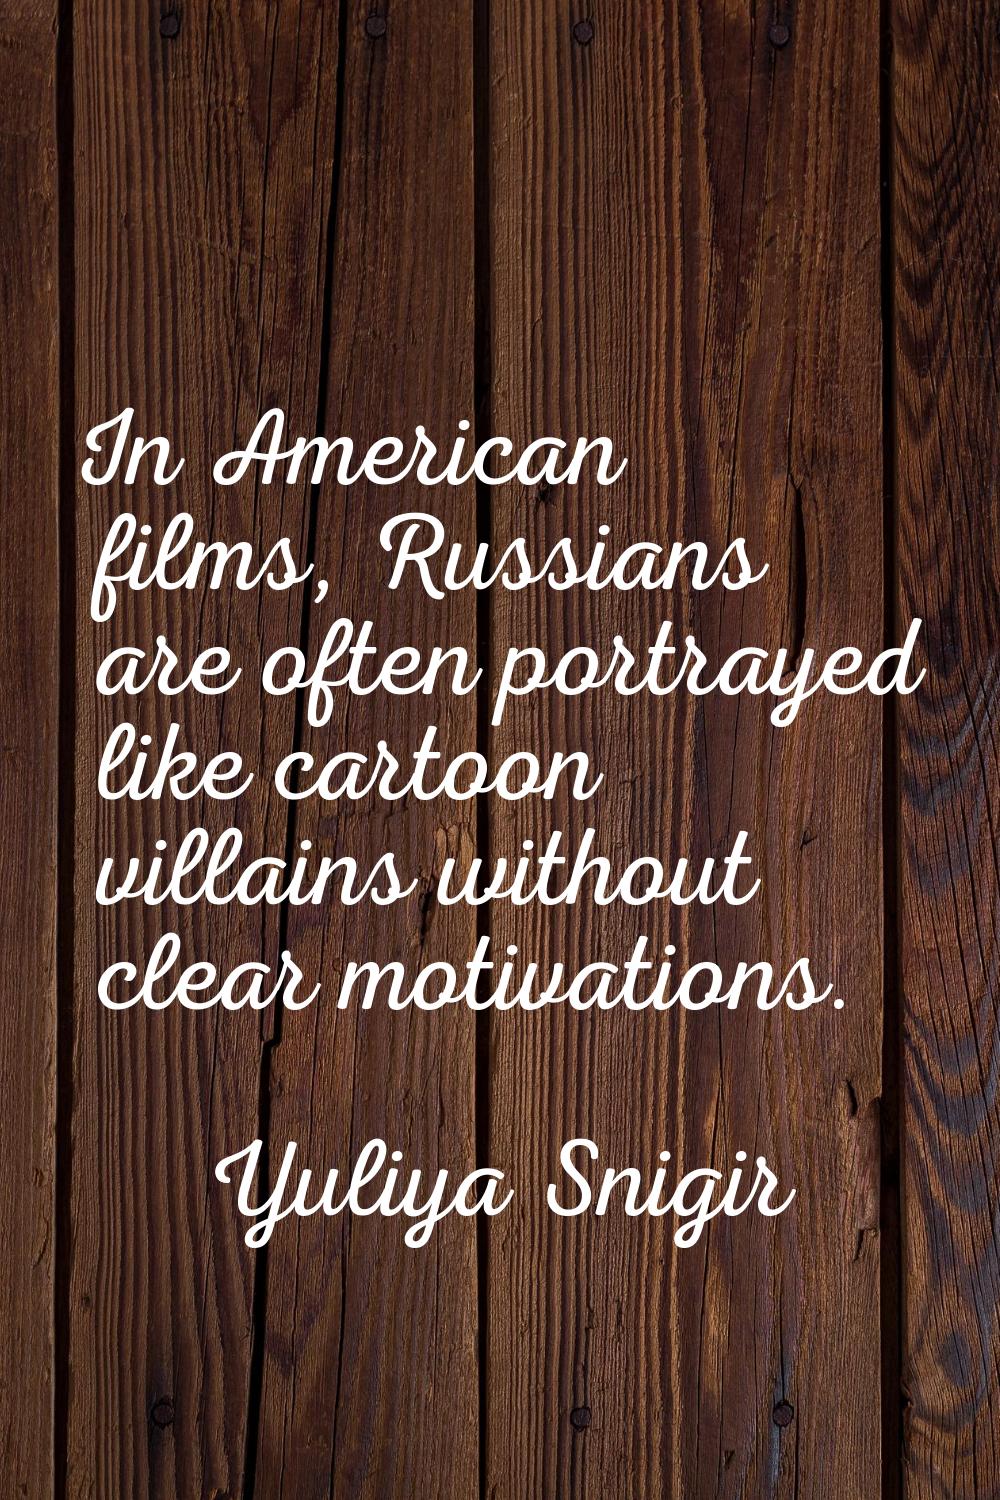 In American films, Russians are often portrayed like cartoon villains without clear motivations.